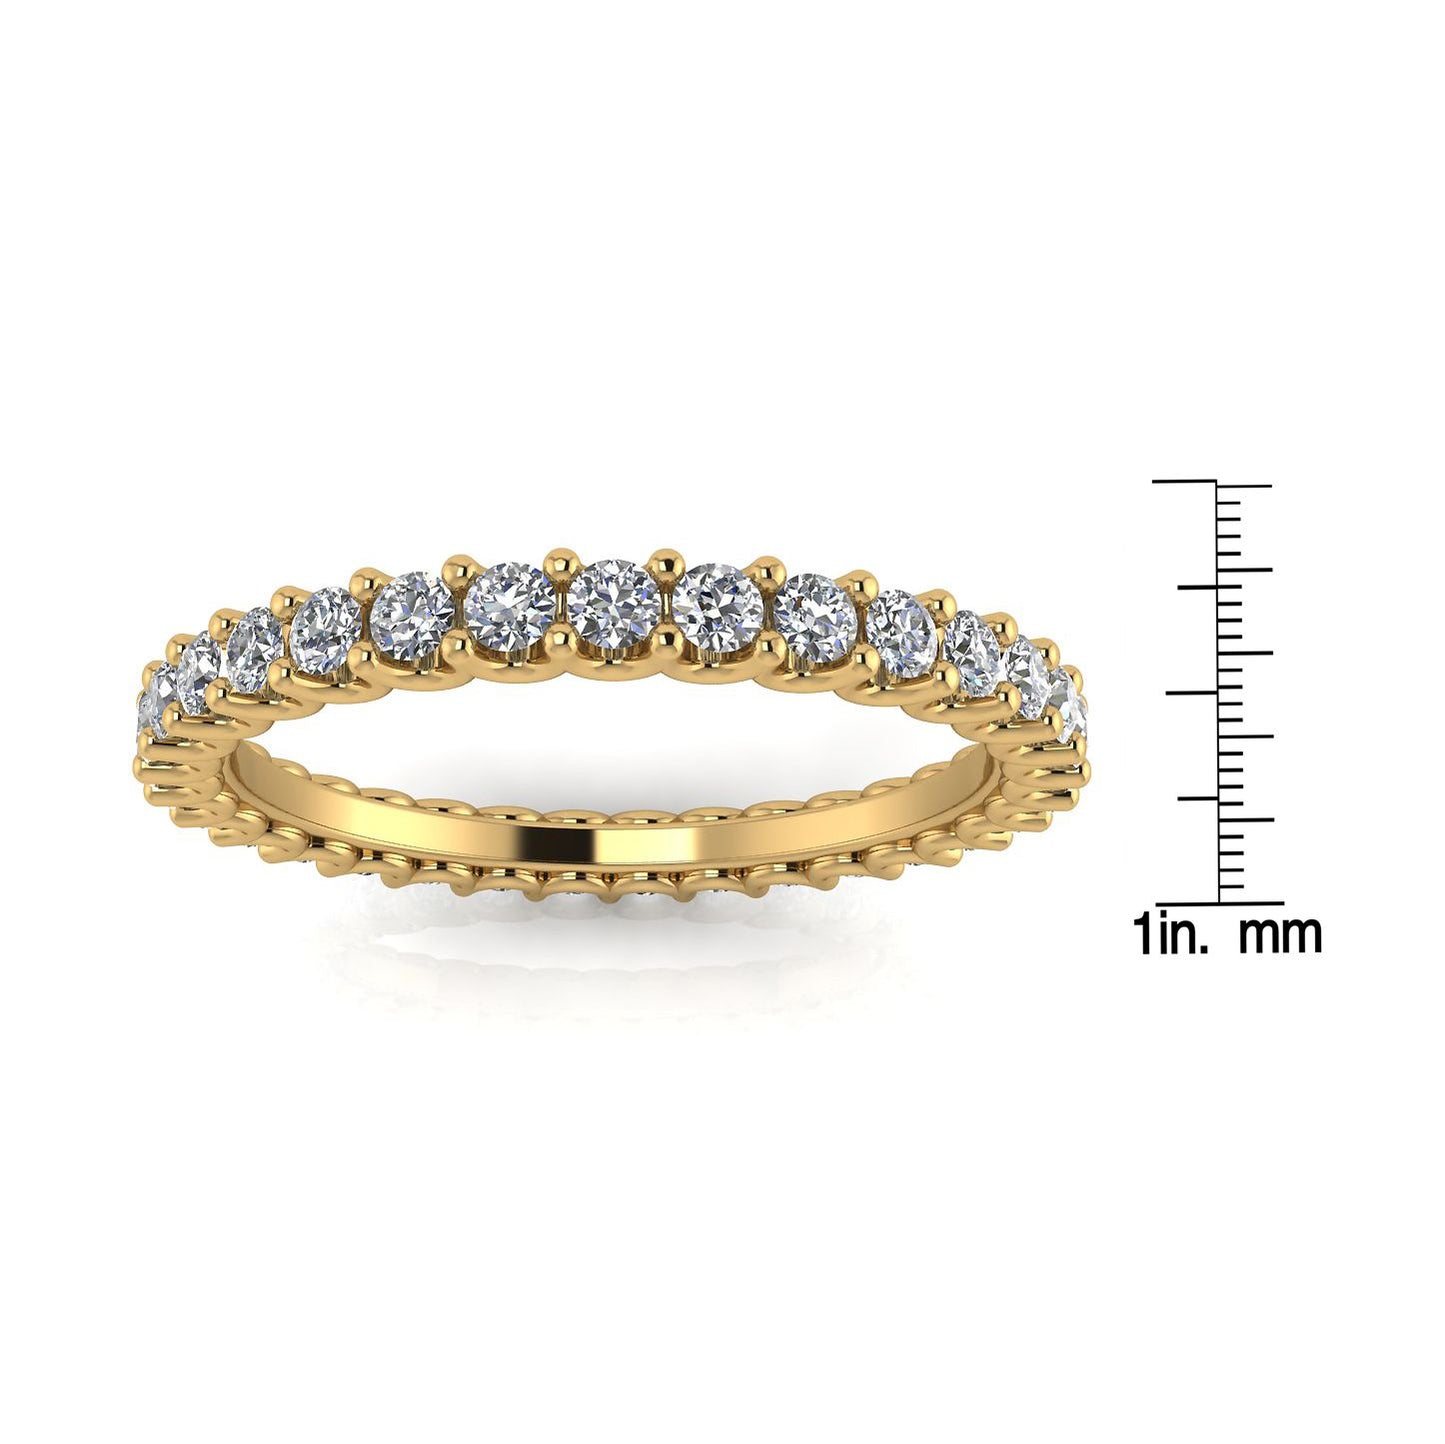 Round Brilliant Cut Diamond Shared Prong Set Eternity Ring In 14k Yellow Gold  (1.43ct. Tw.) Ring Size 5.5